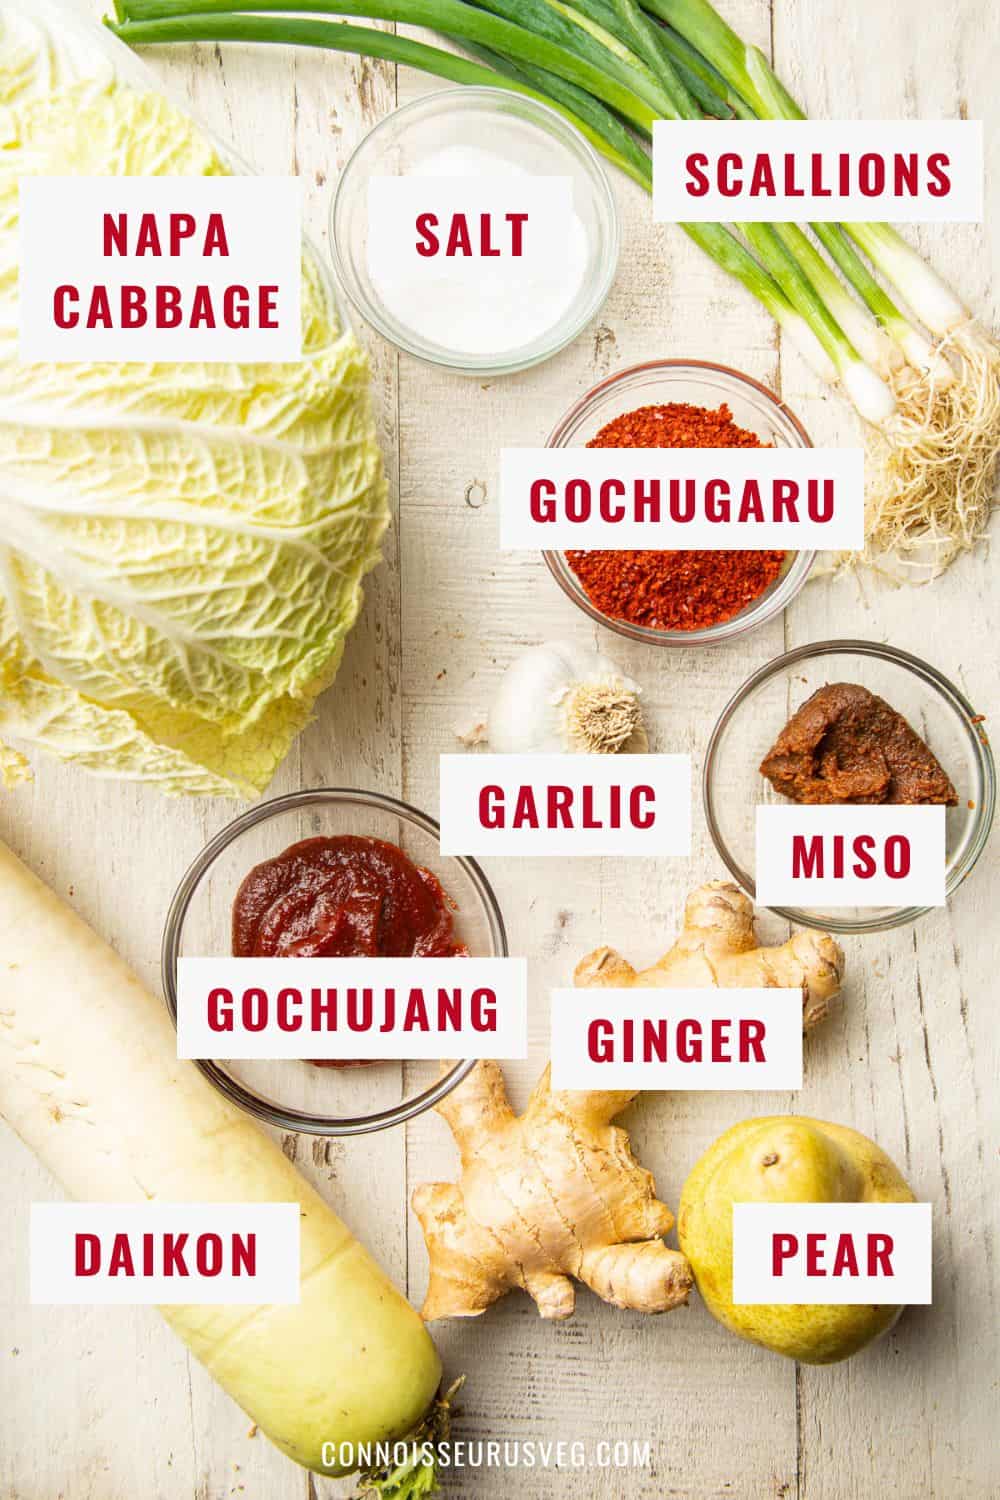 Ingredients for making Vegan Kimchi arranged on a white surface with identification labels.